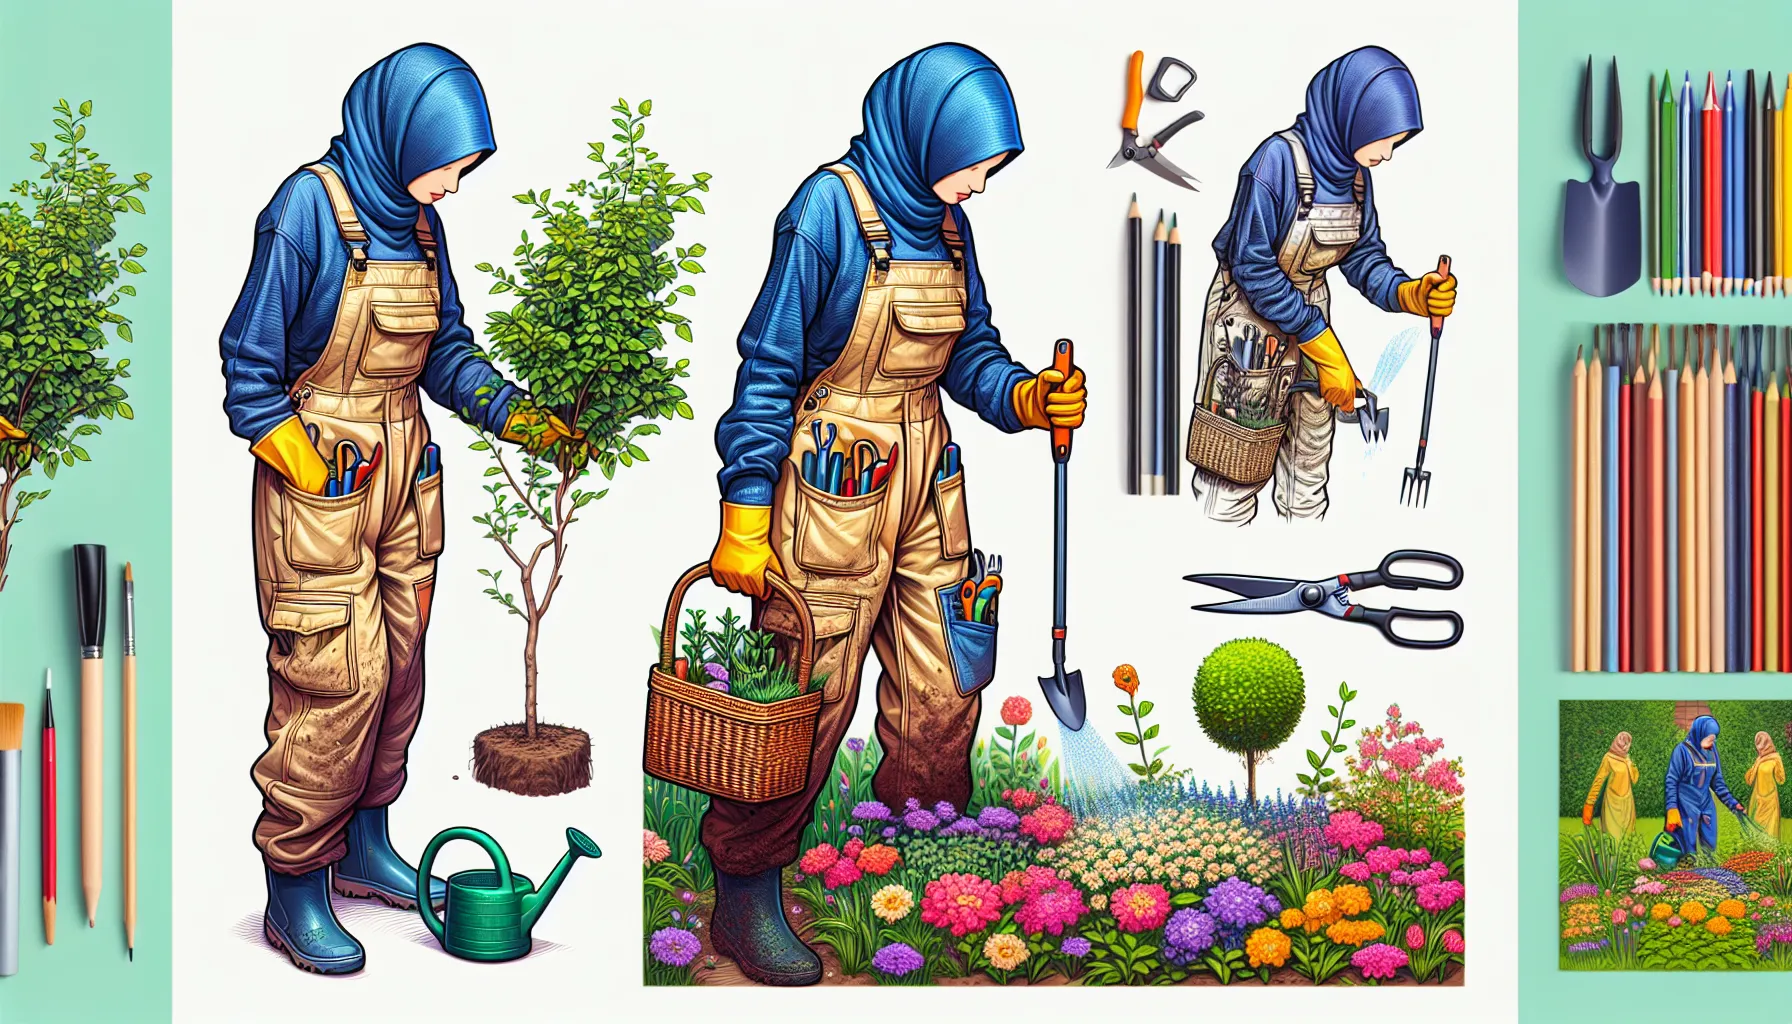 A person in blue gardening overalls and hijab engages in various gardening tasks, surrounded by gardening tools and colorful plants.